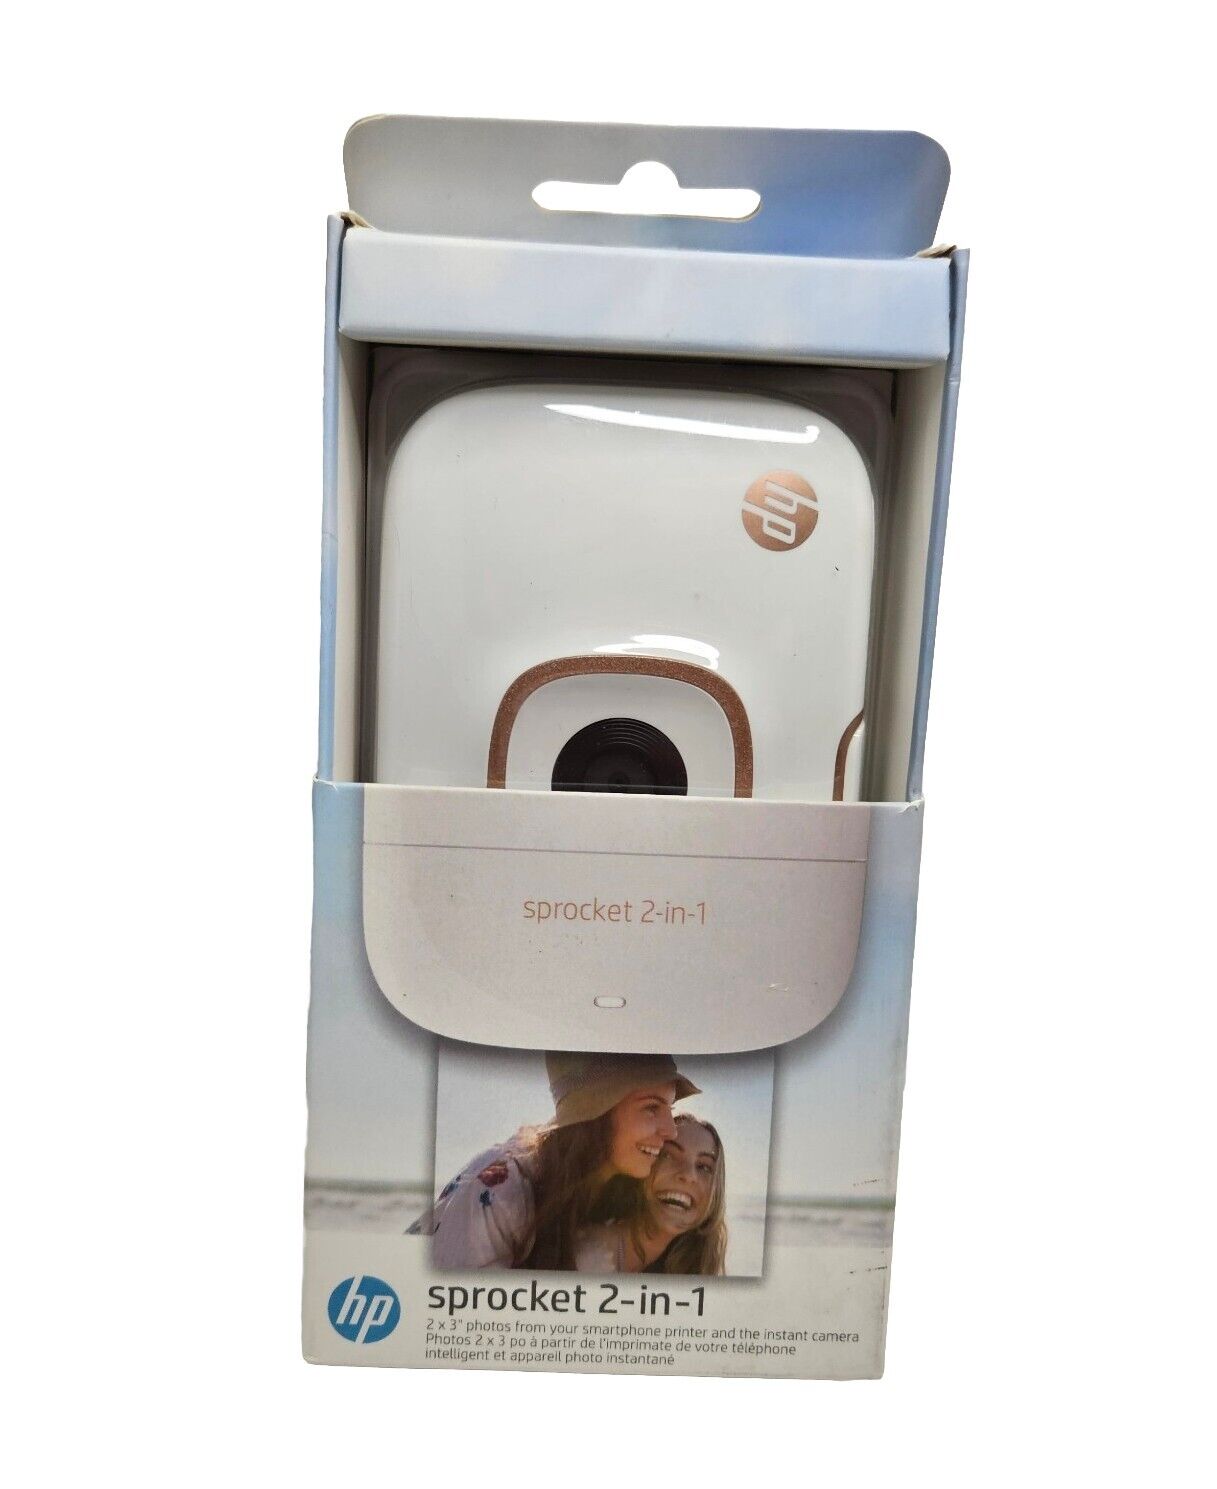 ++ NEW ++ HP Sprocket 2-in-1 Portable Photo Printer & Instant Camera White